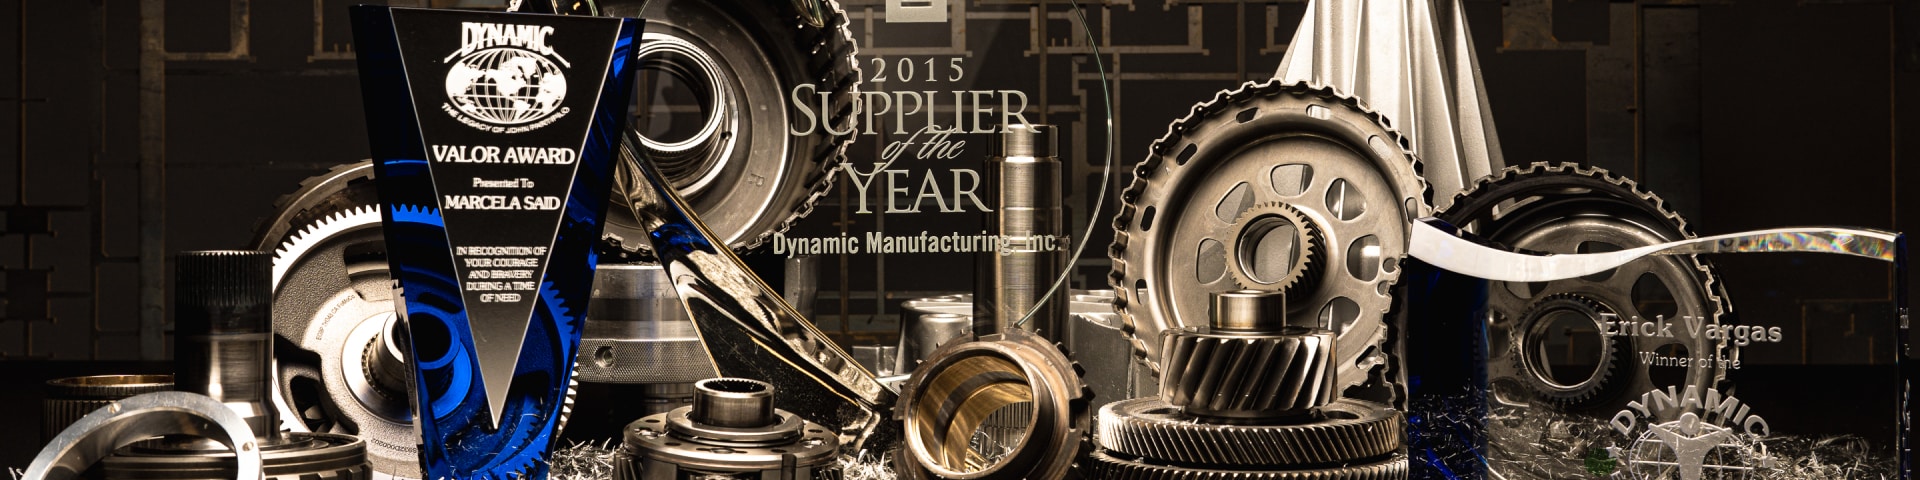 2015- Supplier Of The Year Award | Dynamic Manufacturing